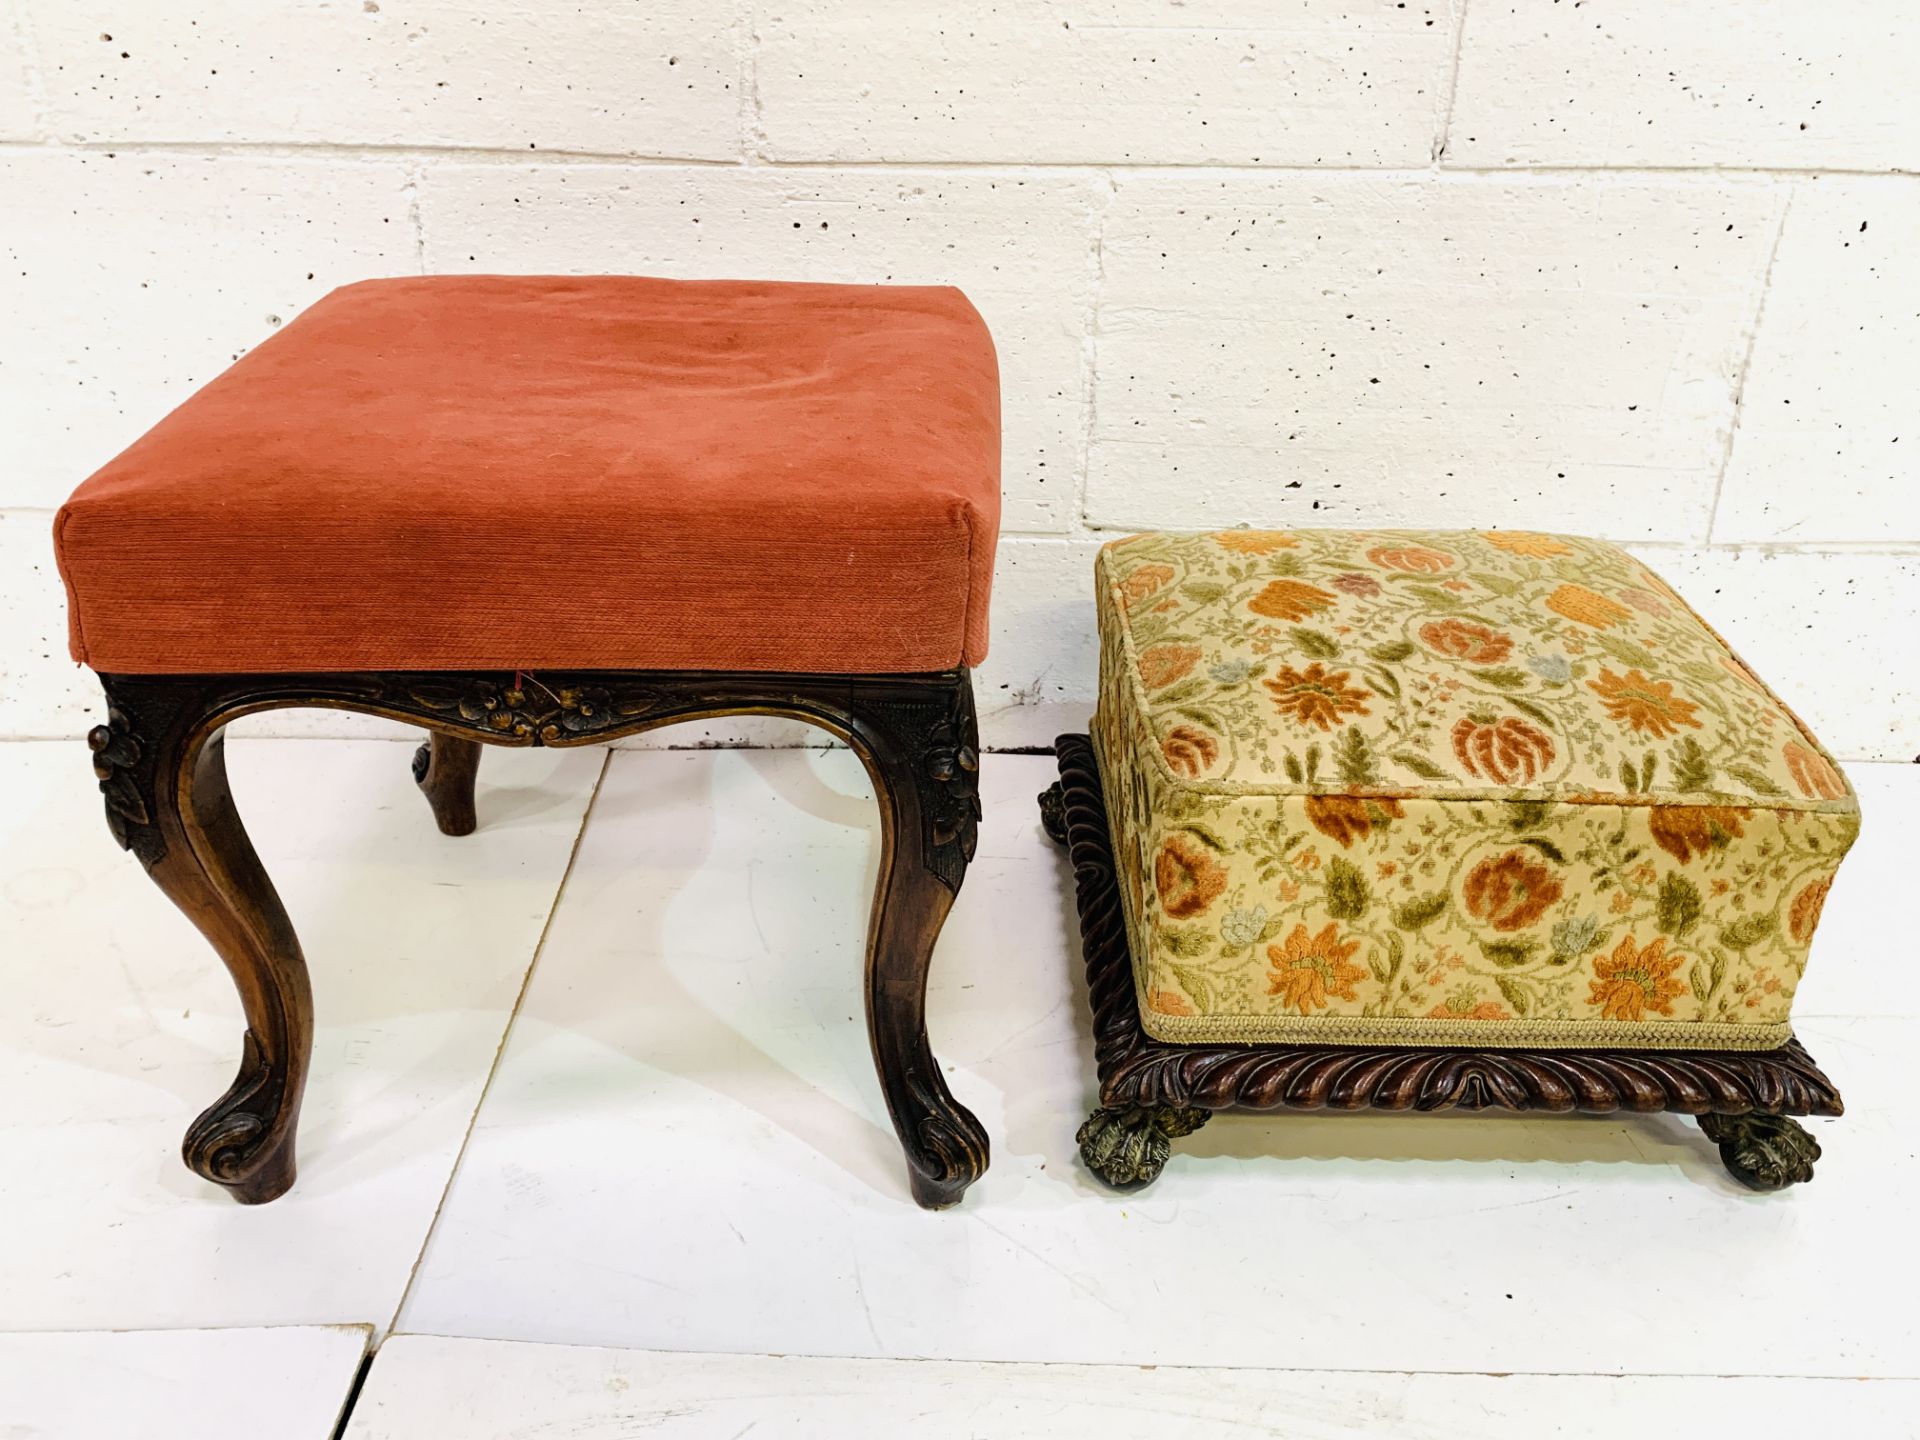 Carved mahogany footstool together with an upholstered footstool